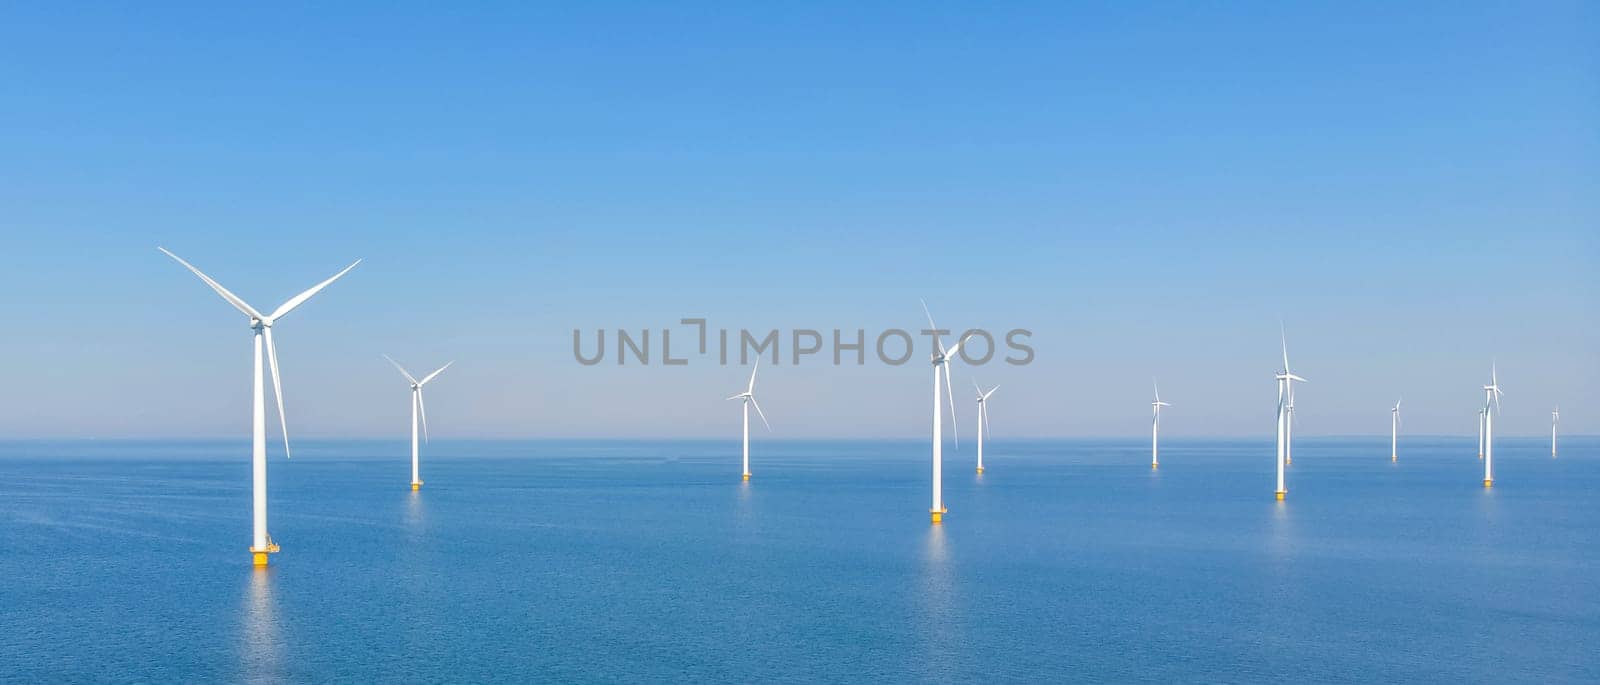 A wind farm with rows of wind turbines in the middle of the ocean, blending into the natural landscape between the water and the azure sky